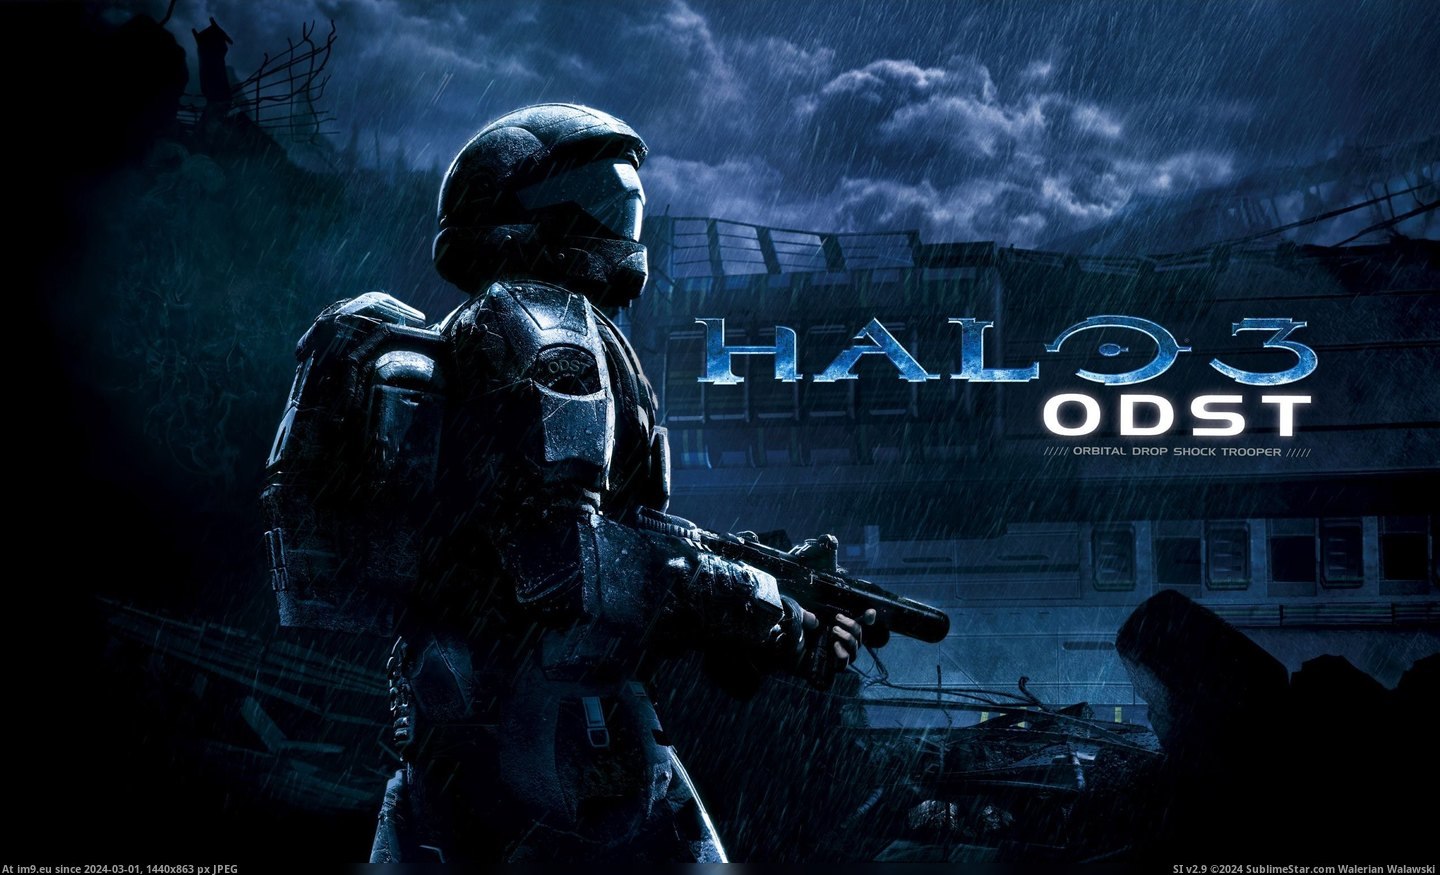 #Game #Halo #Video Video Game Halo 75123 Pic. (Изображение из альбом Games Wallpapers))